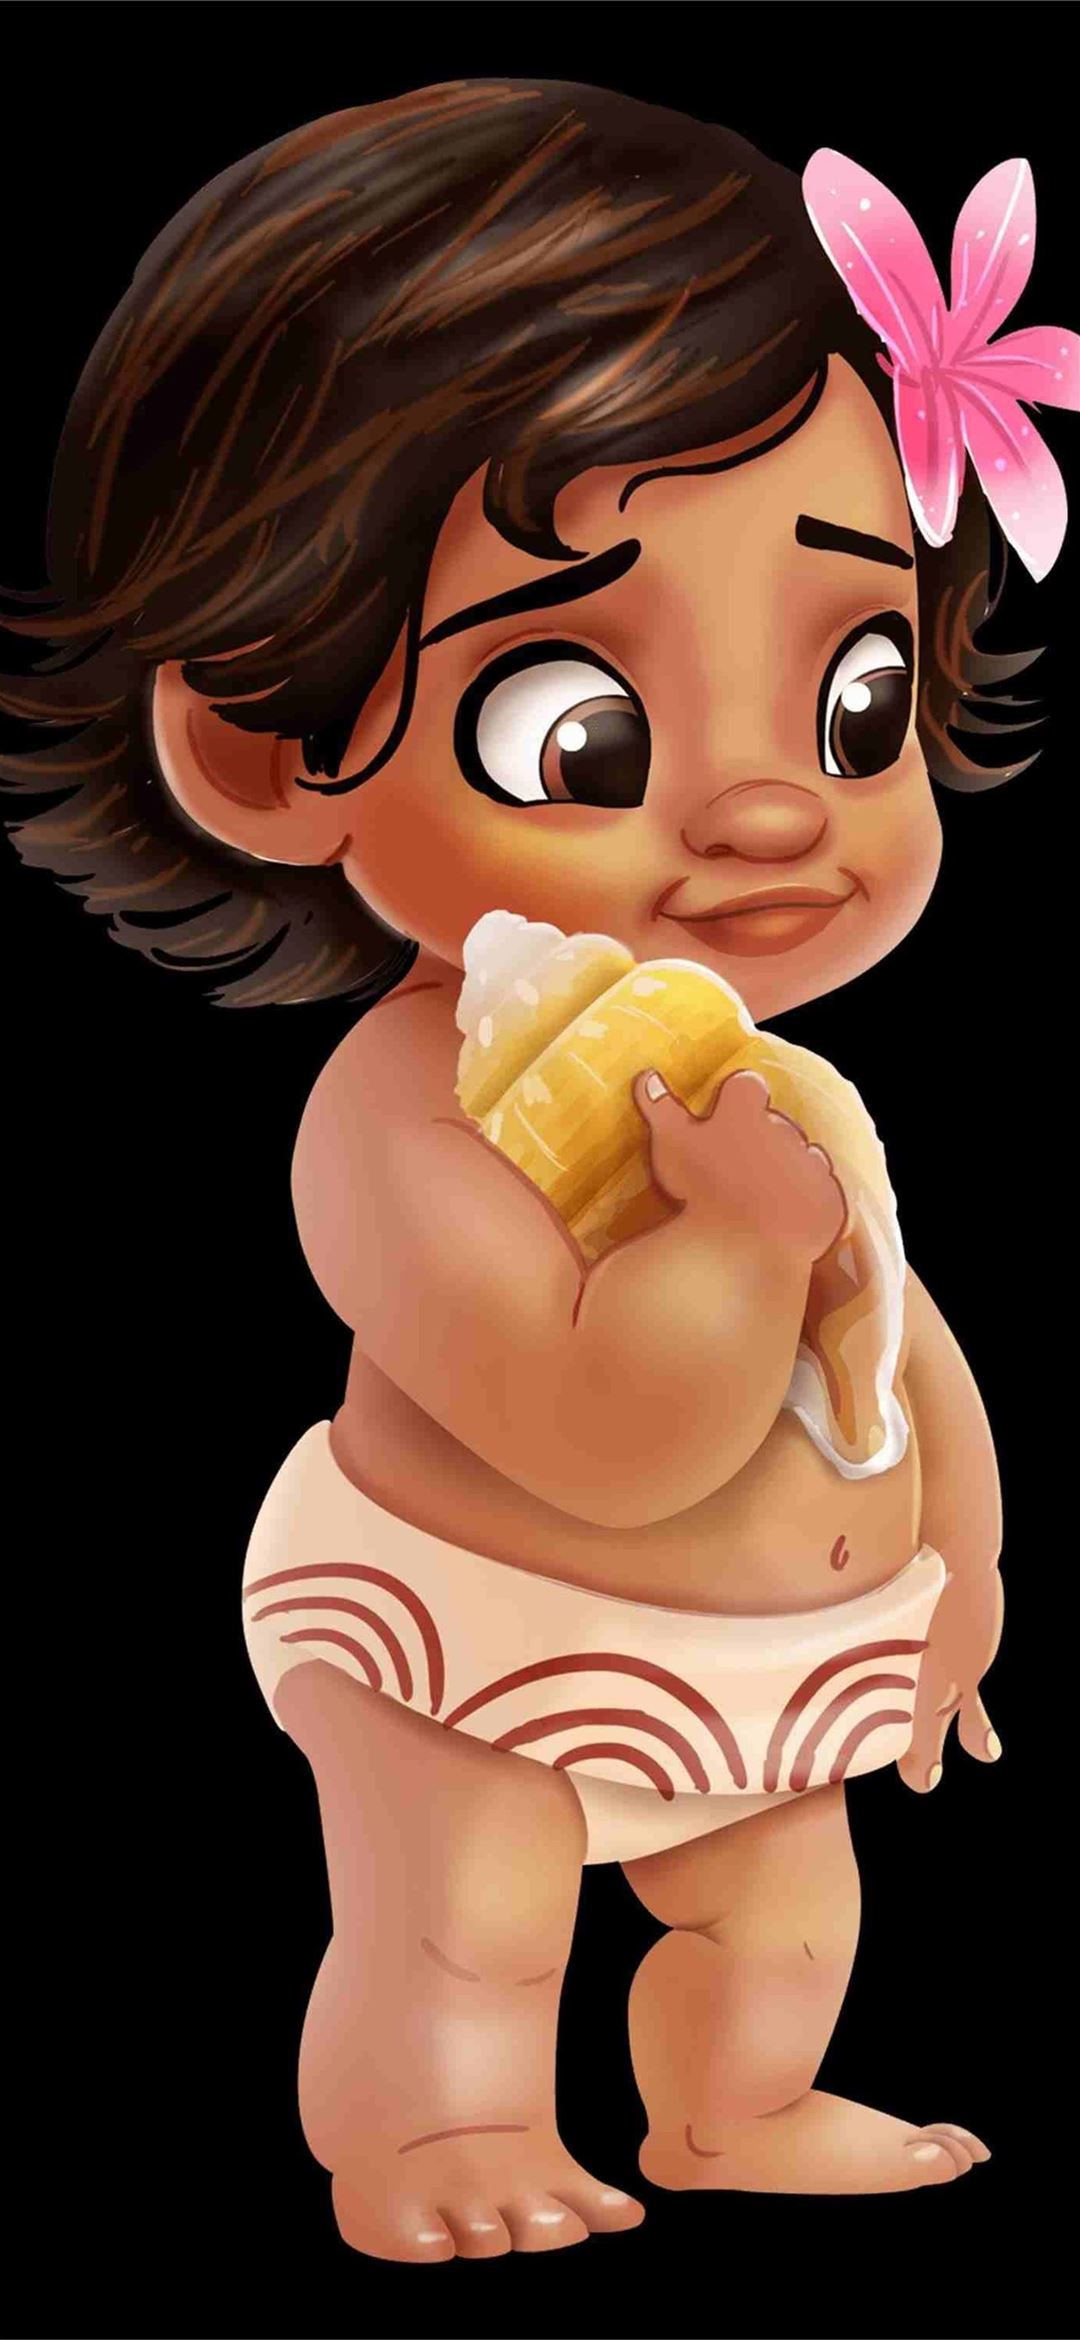 Baby Moana Phone Top Free Baby Moana Phone Backgro Iphone Wallpapers Free Download